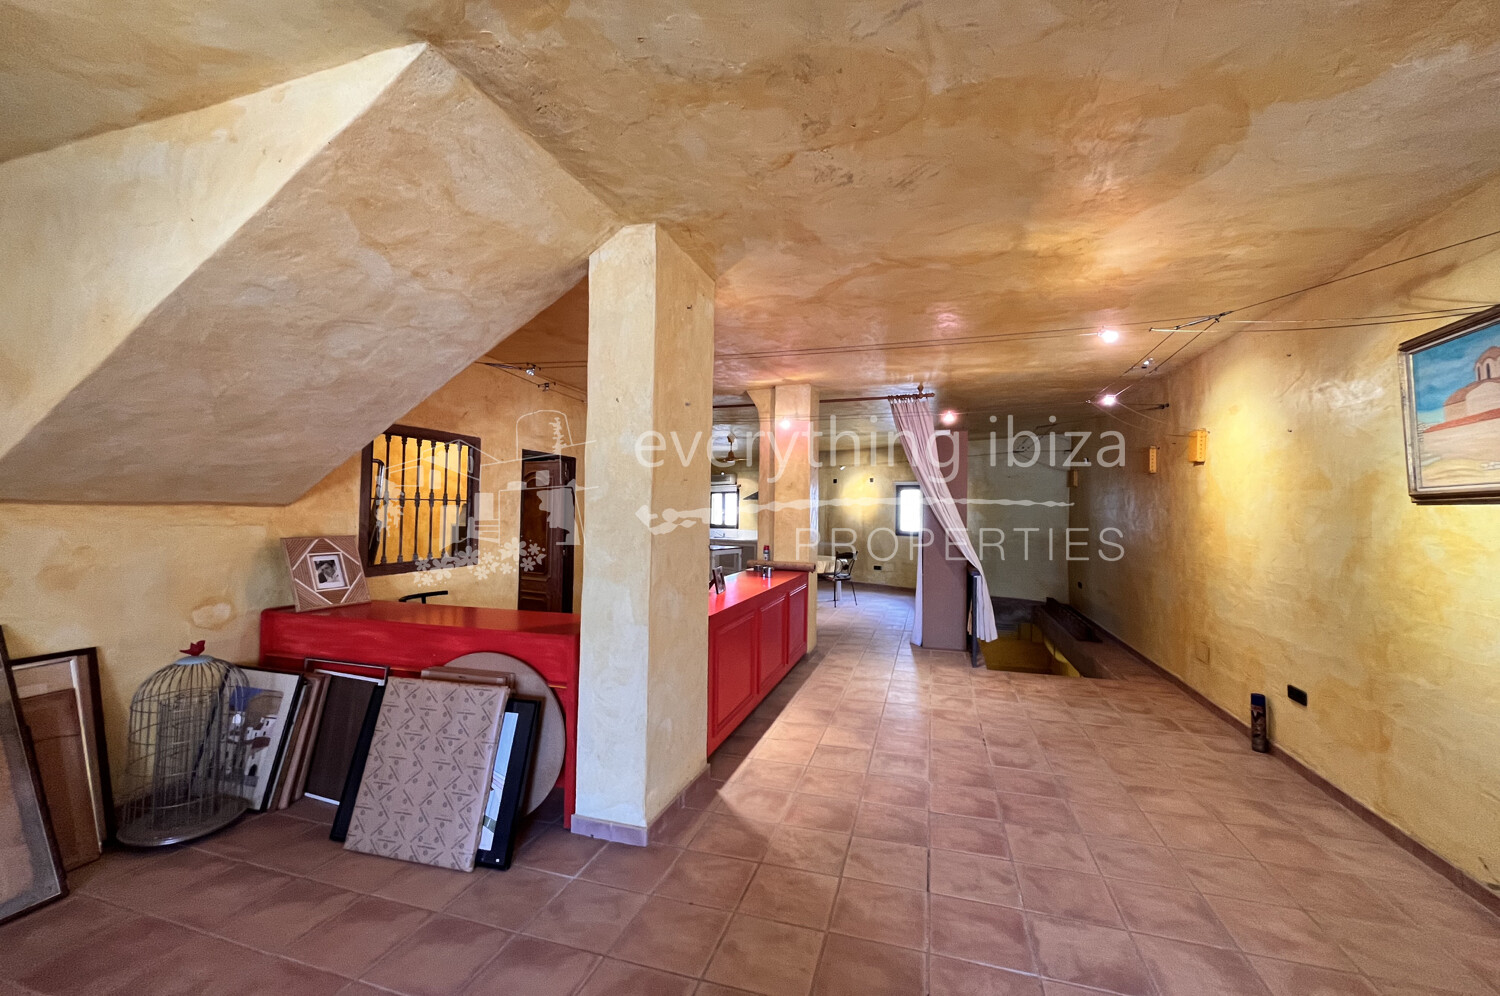 https://www.everythingibiza.com/properties/versatile-commer…of-san-jose-1640/,ref. 4, for sale in Ibiza by everything ibiza Properties